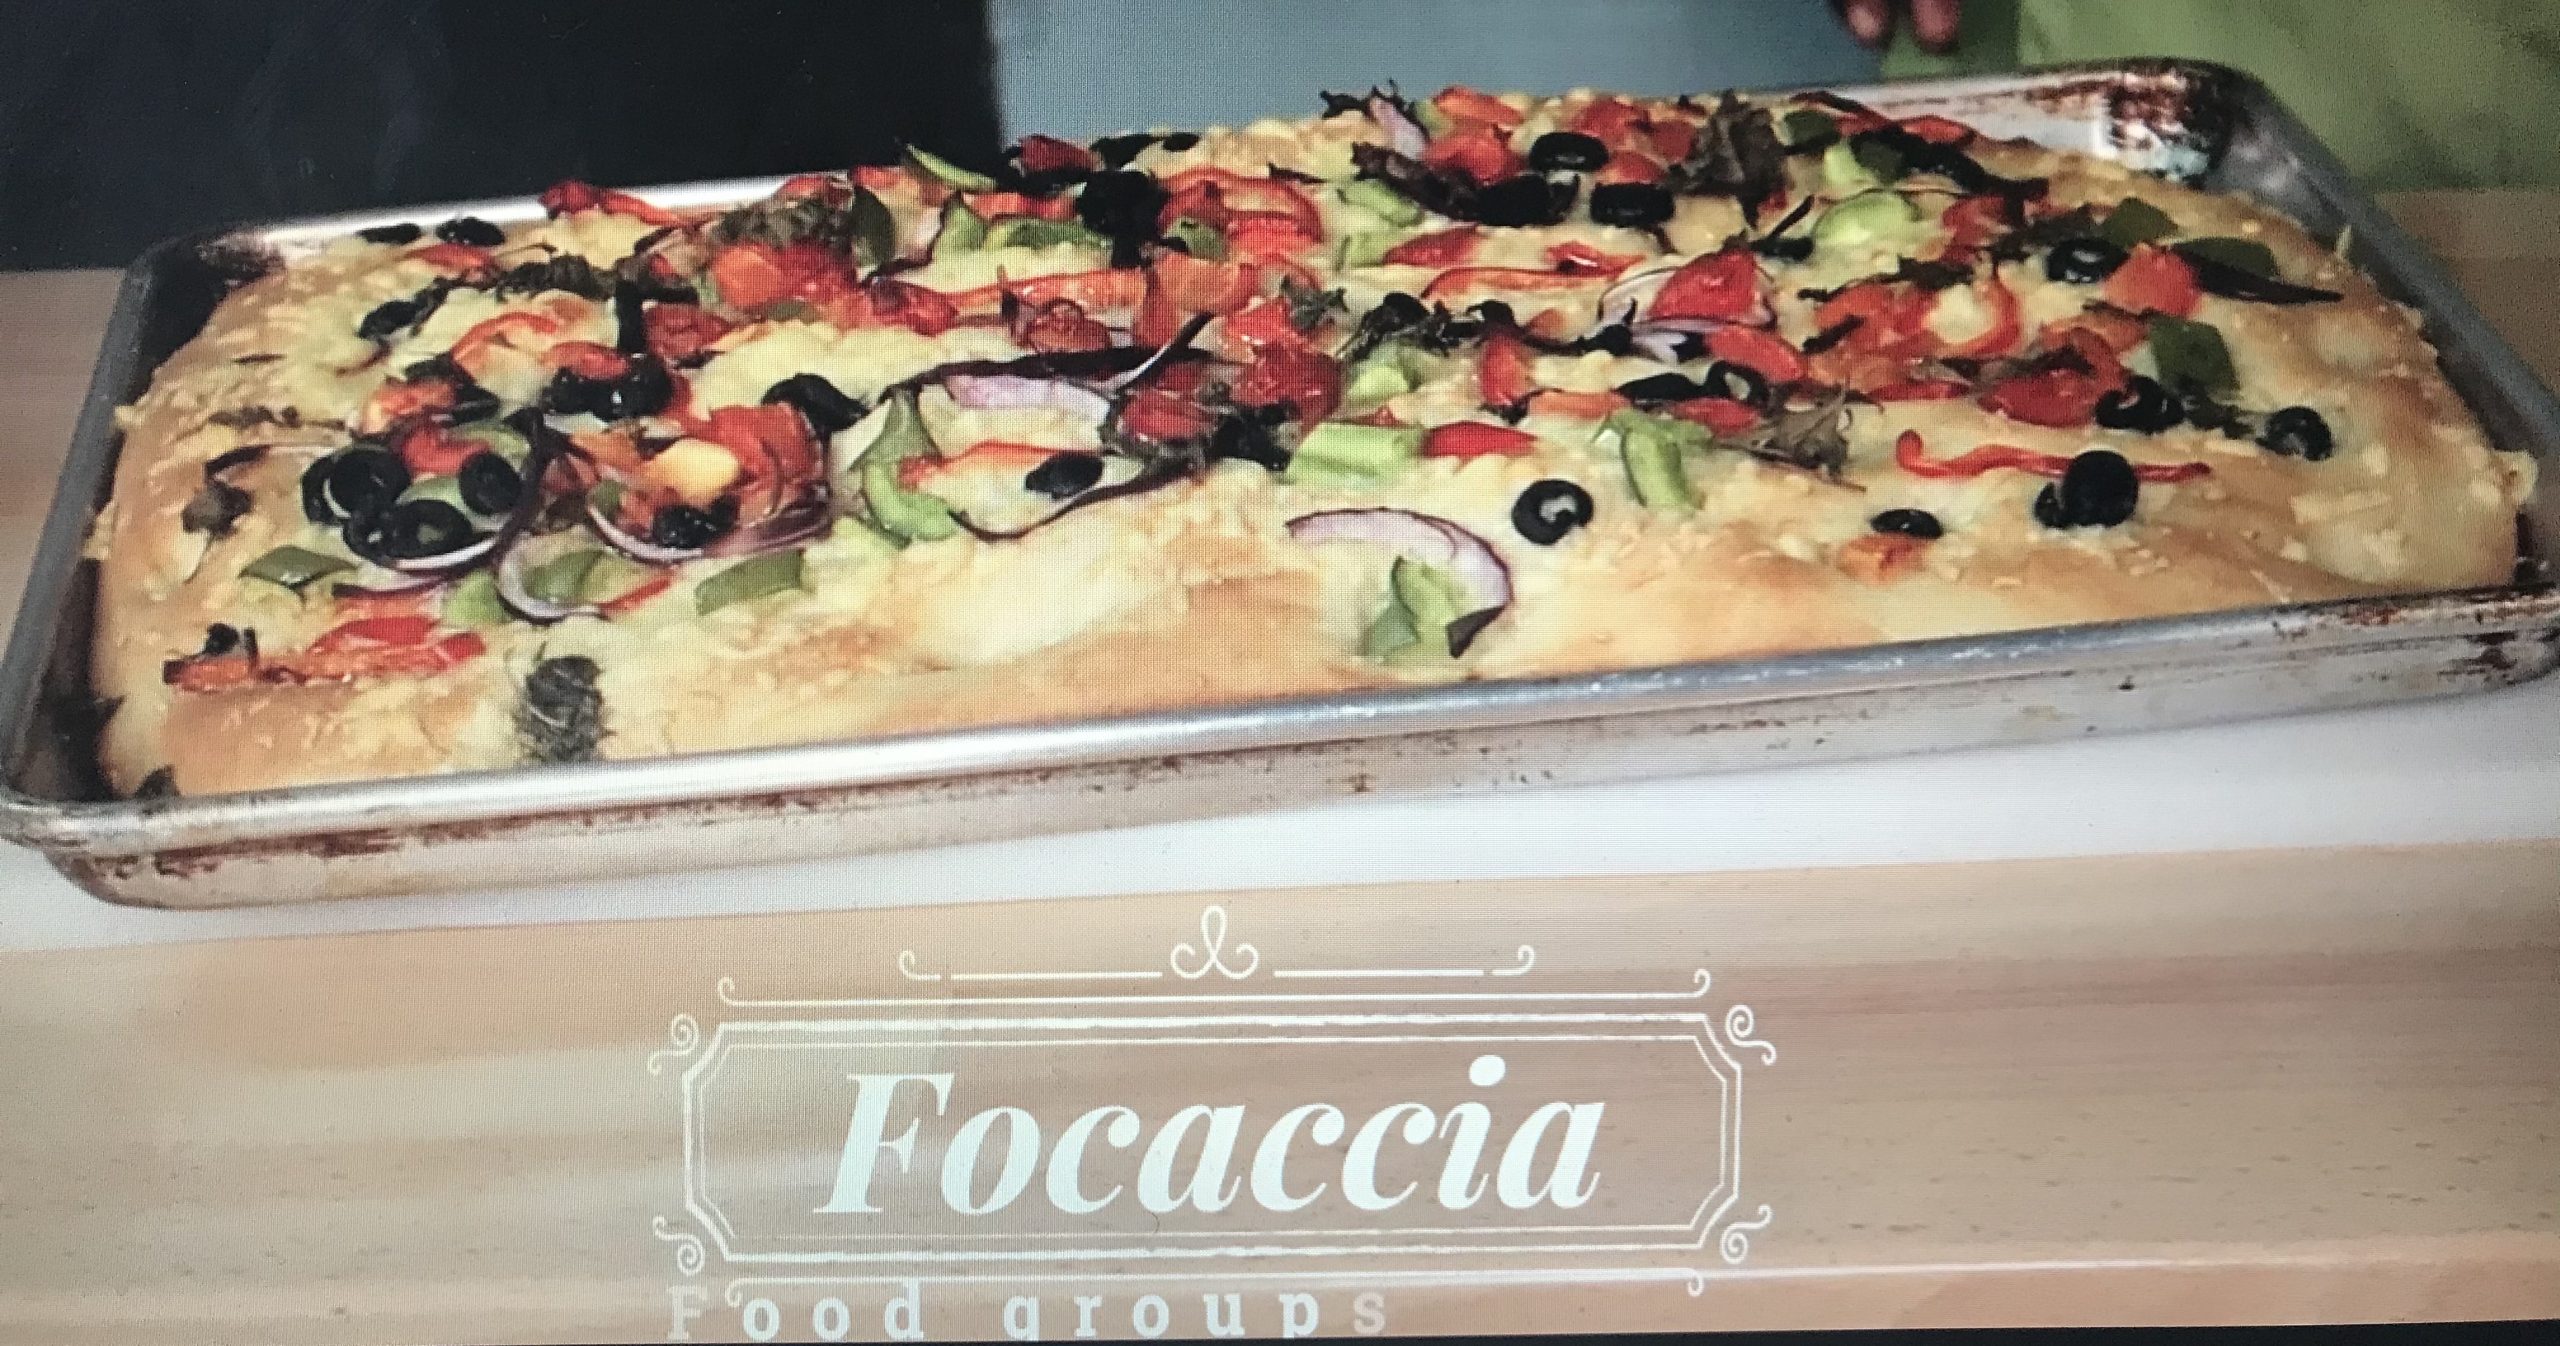 Izzso media: “Food Groups” Learn to make ‘Focaccia’ Tasty Italian flat bread with delicious Parmesan cheese and veggies